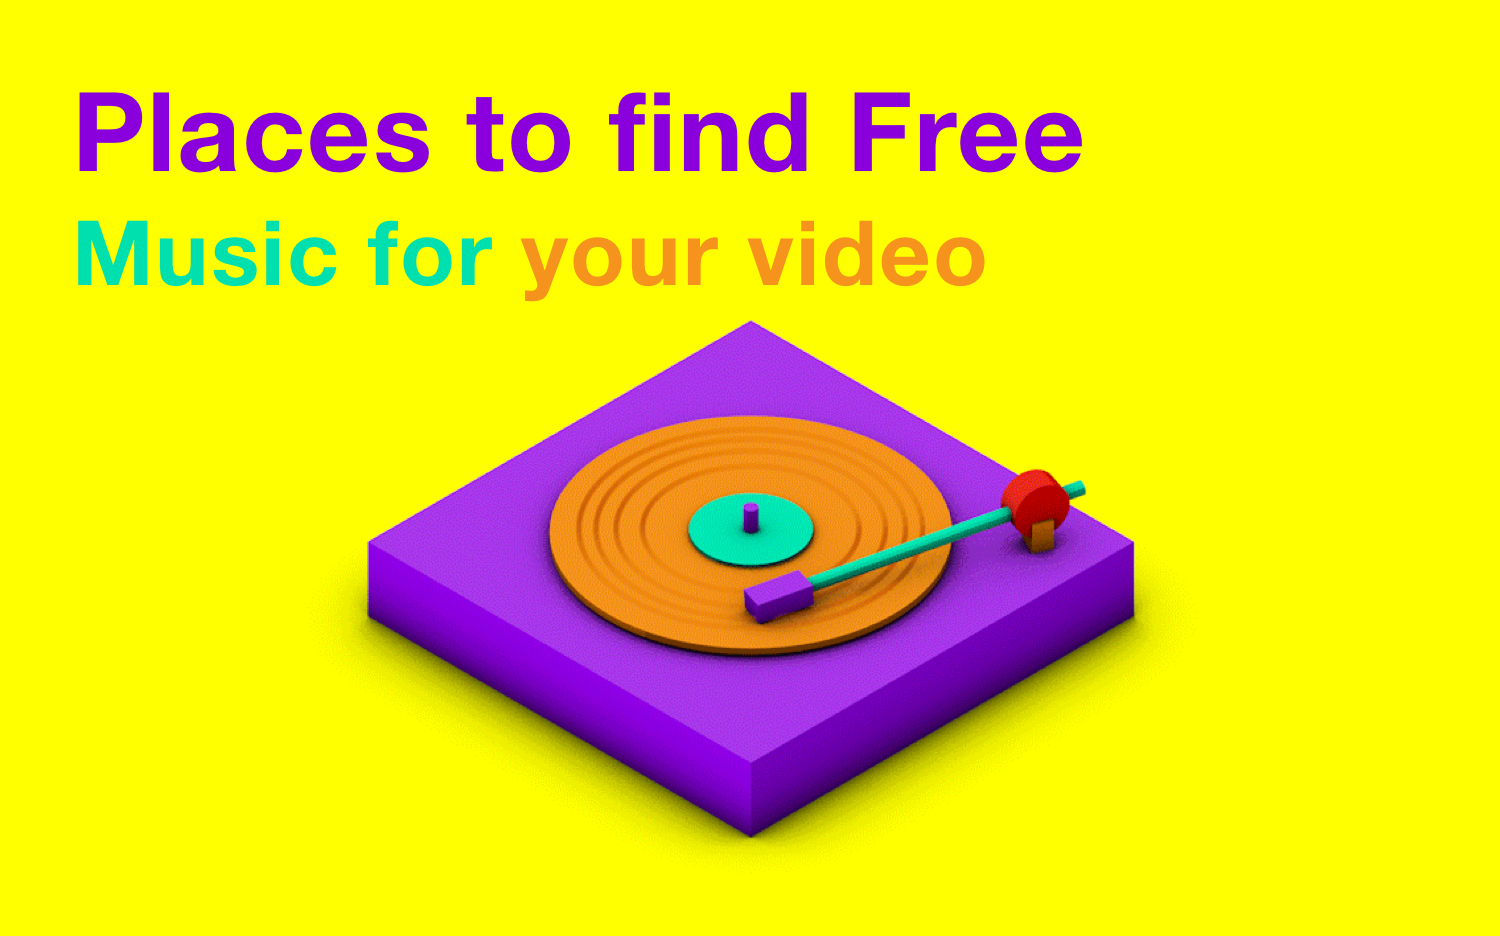 25 Amazing Places To Find Free Music For Your Videos By Timur